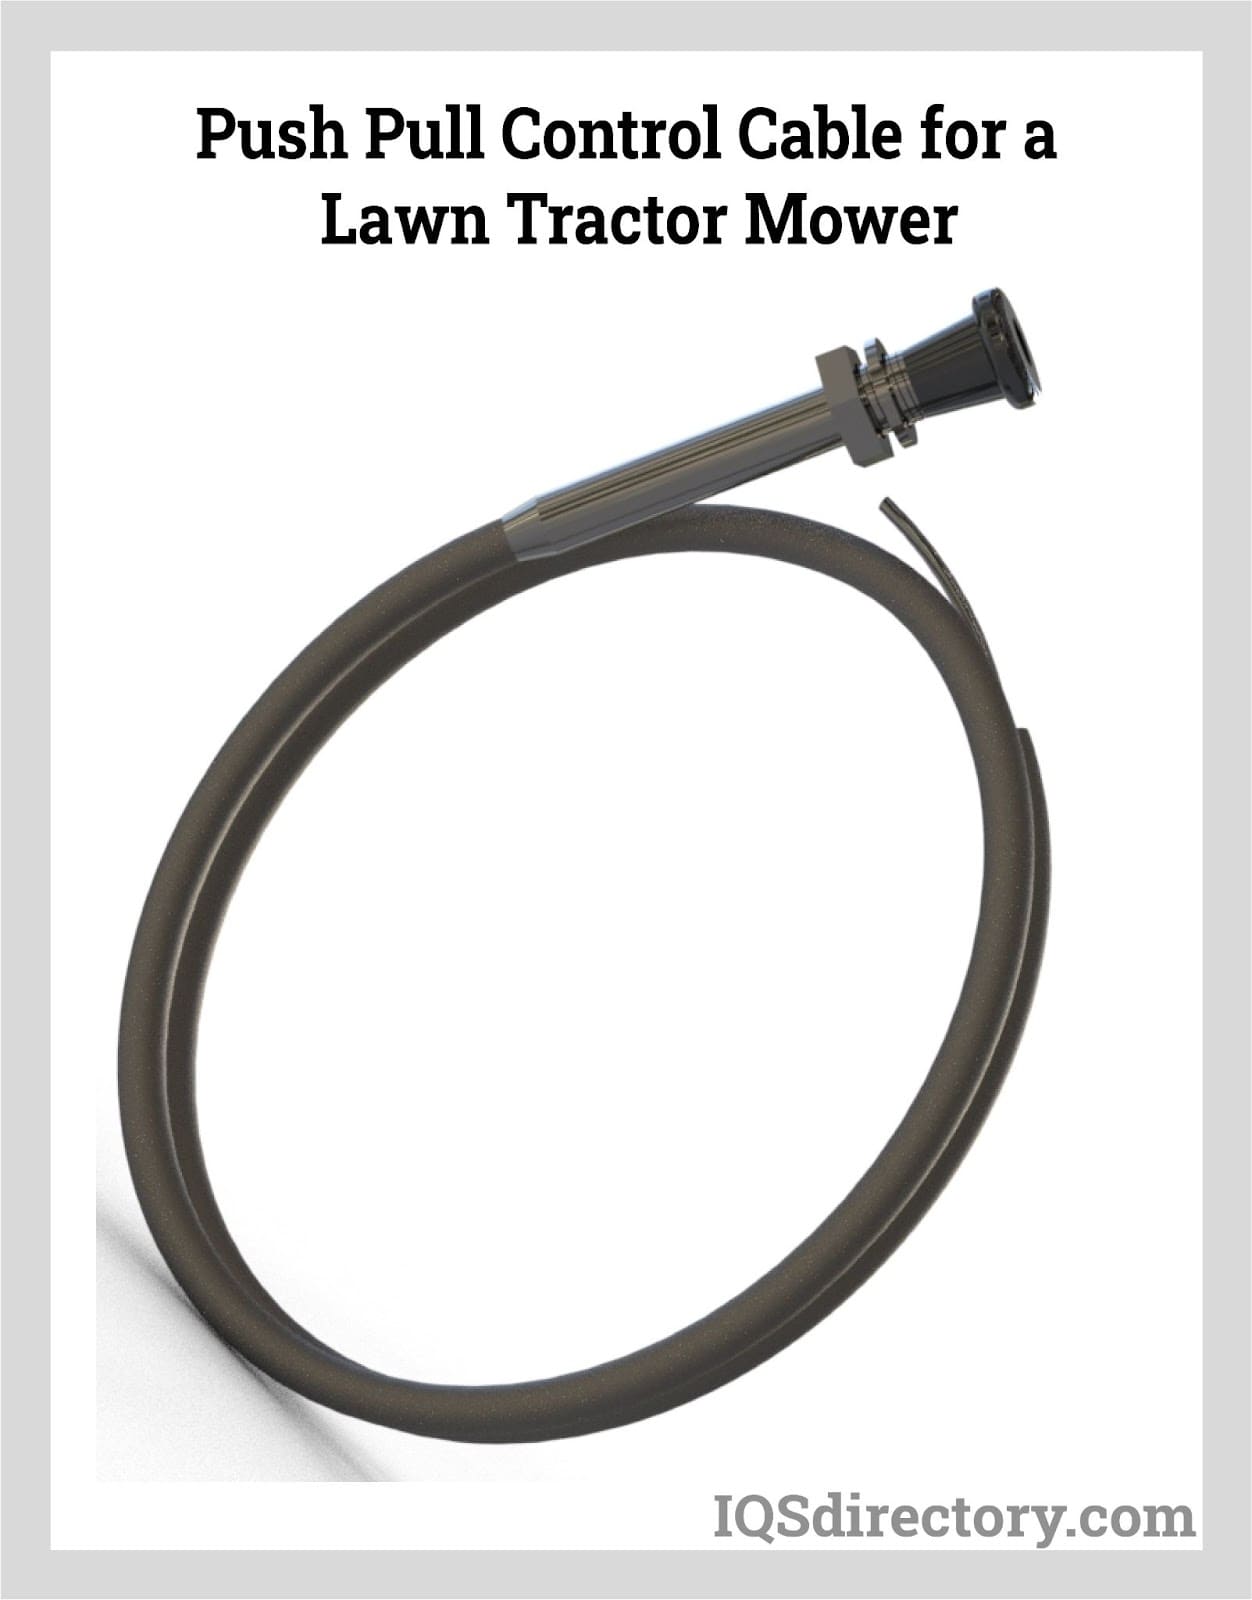 Push Pull Control Cable for a Lawn Tractor Mower